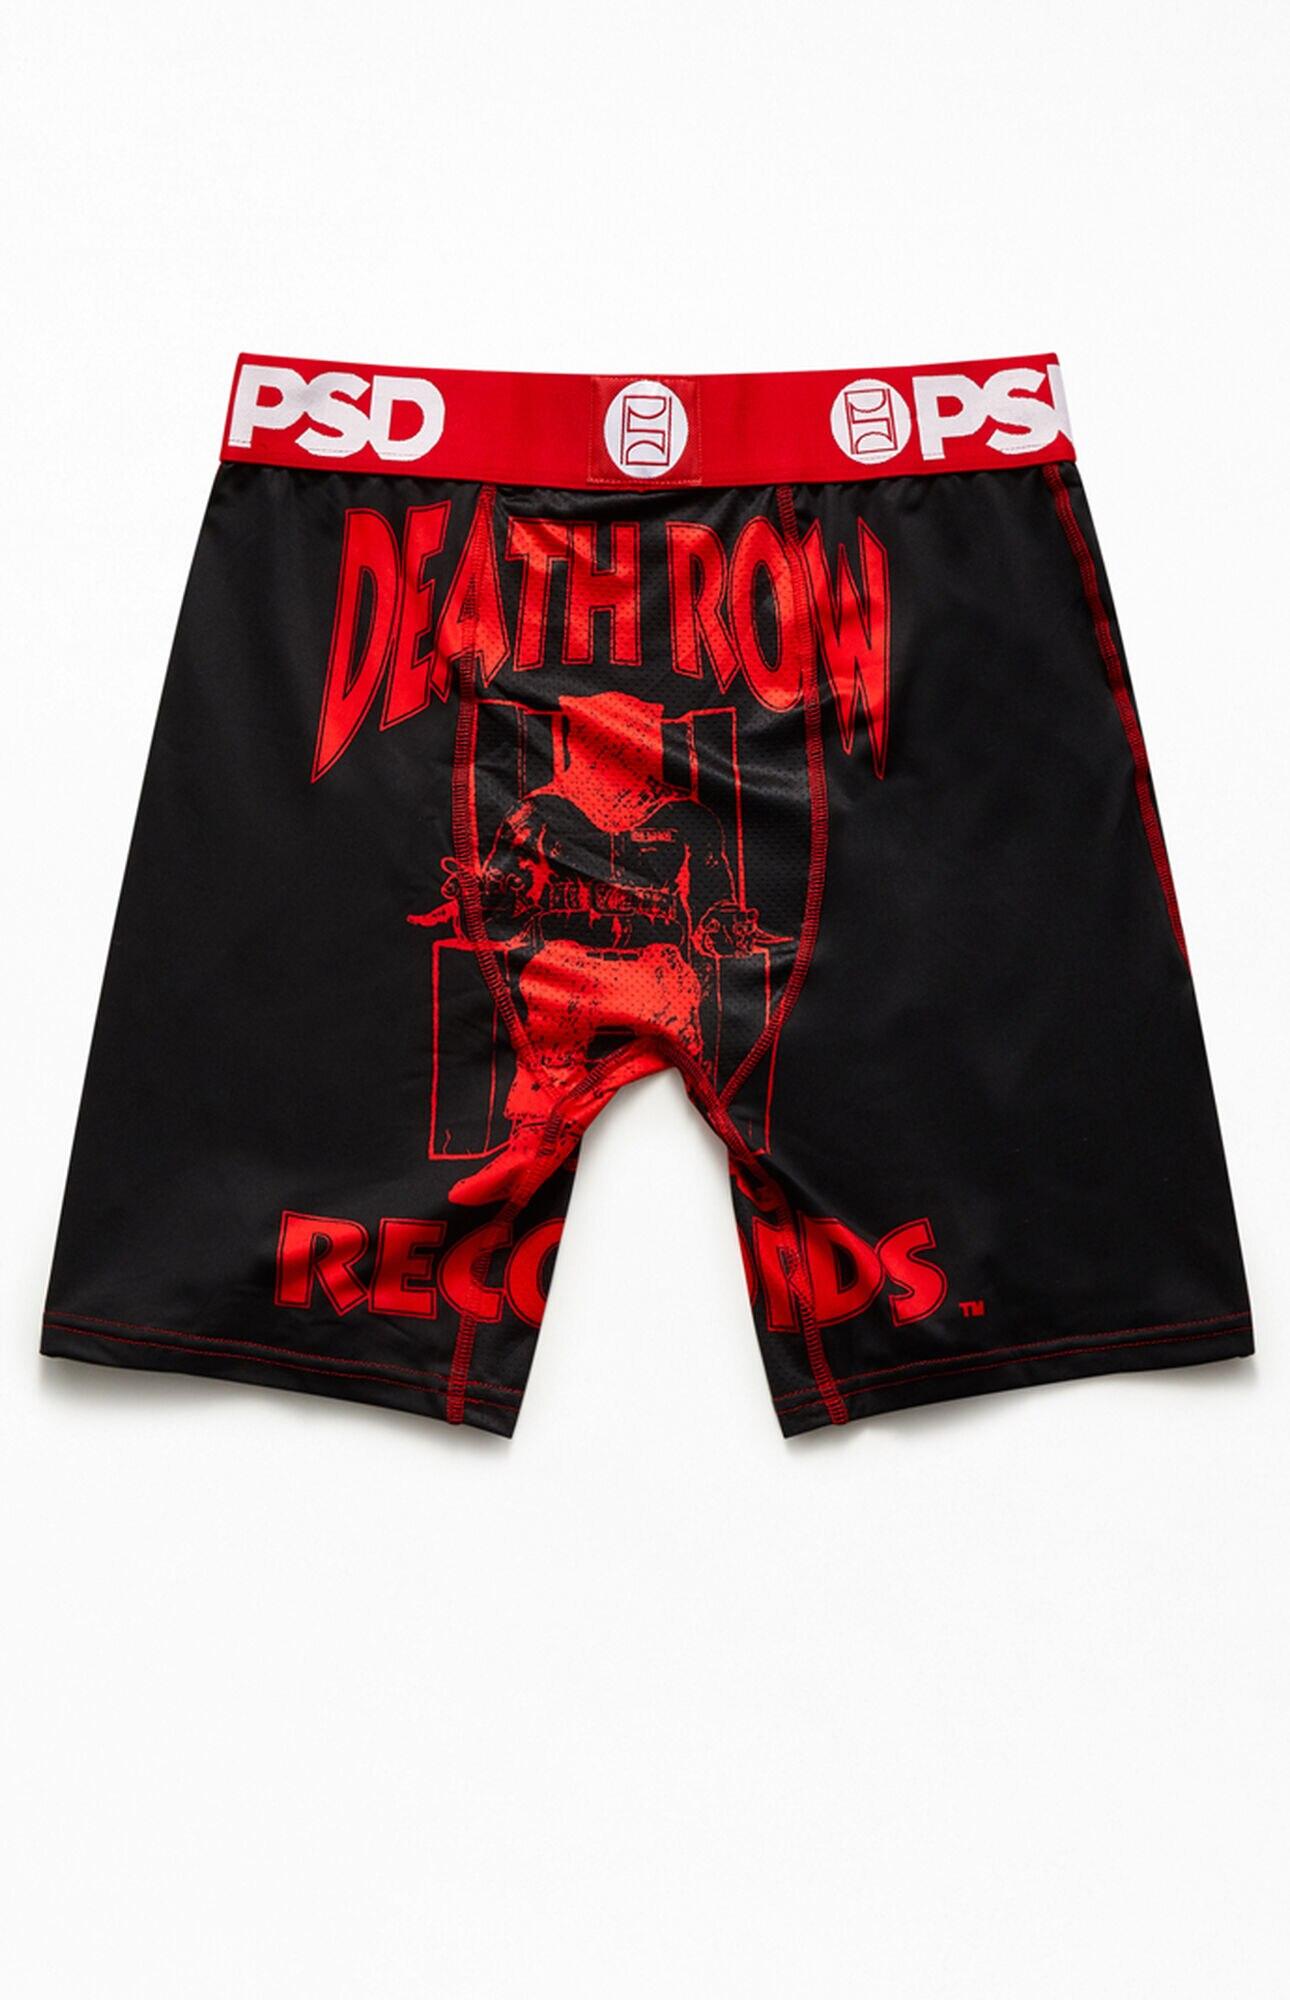 Download Psd Underwear Synthetic Death Row Boxer Briefs In Black Red Red For Men Lyst